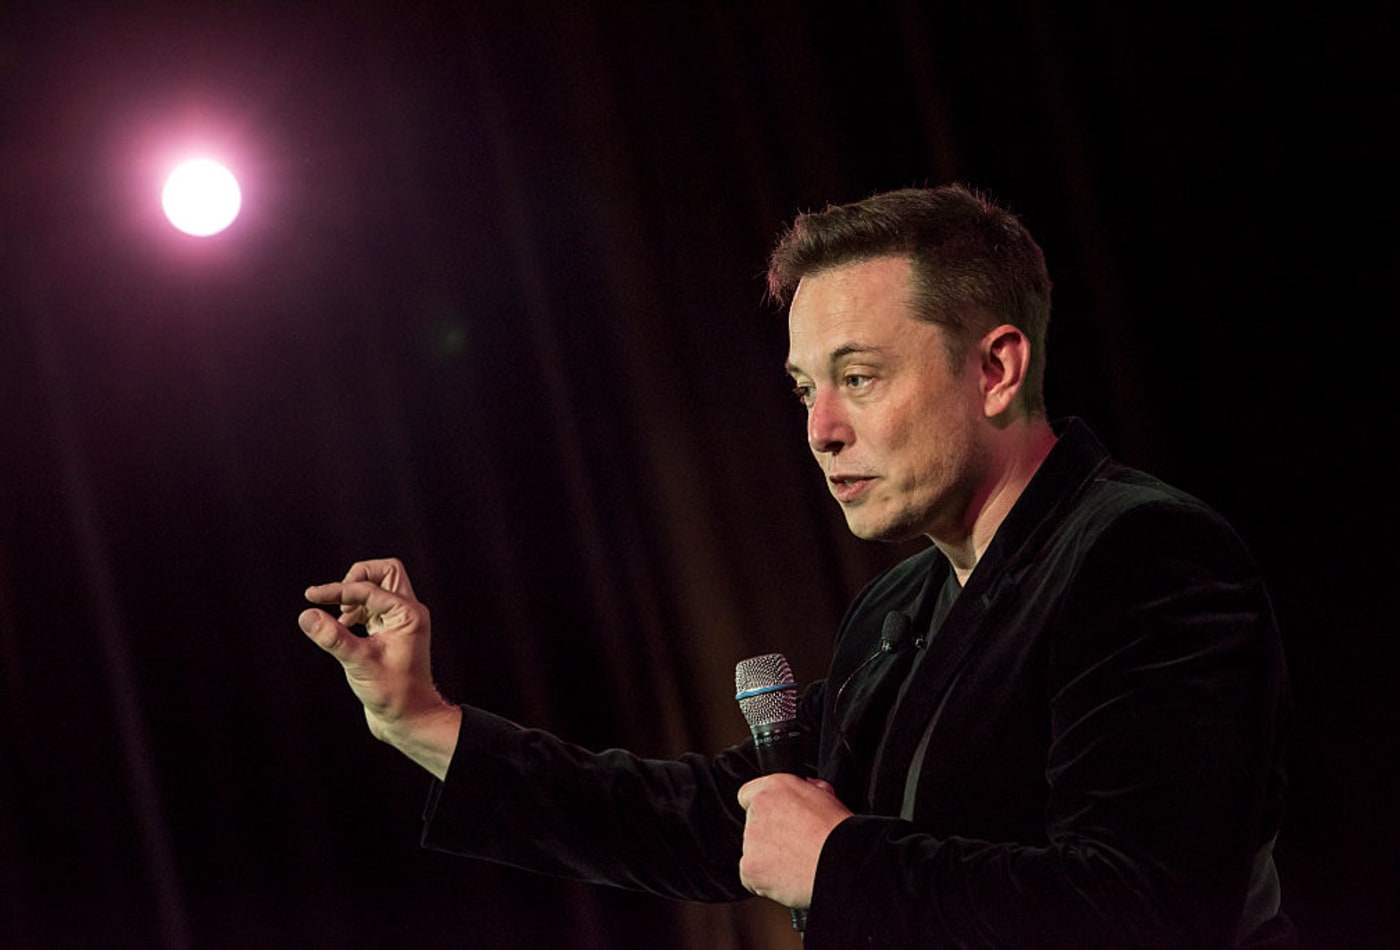 Elon Musk has detailed how humans will survive on Mars within our lifetime